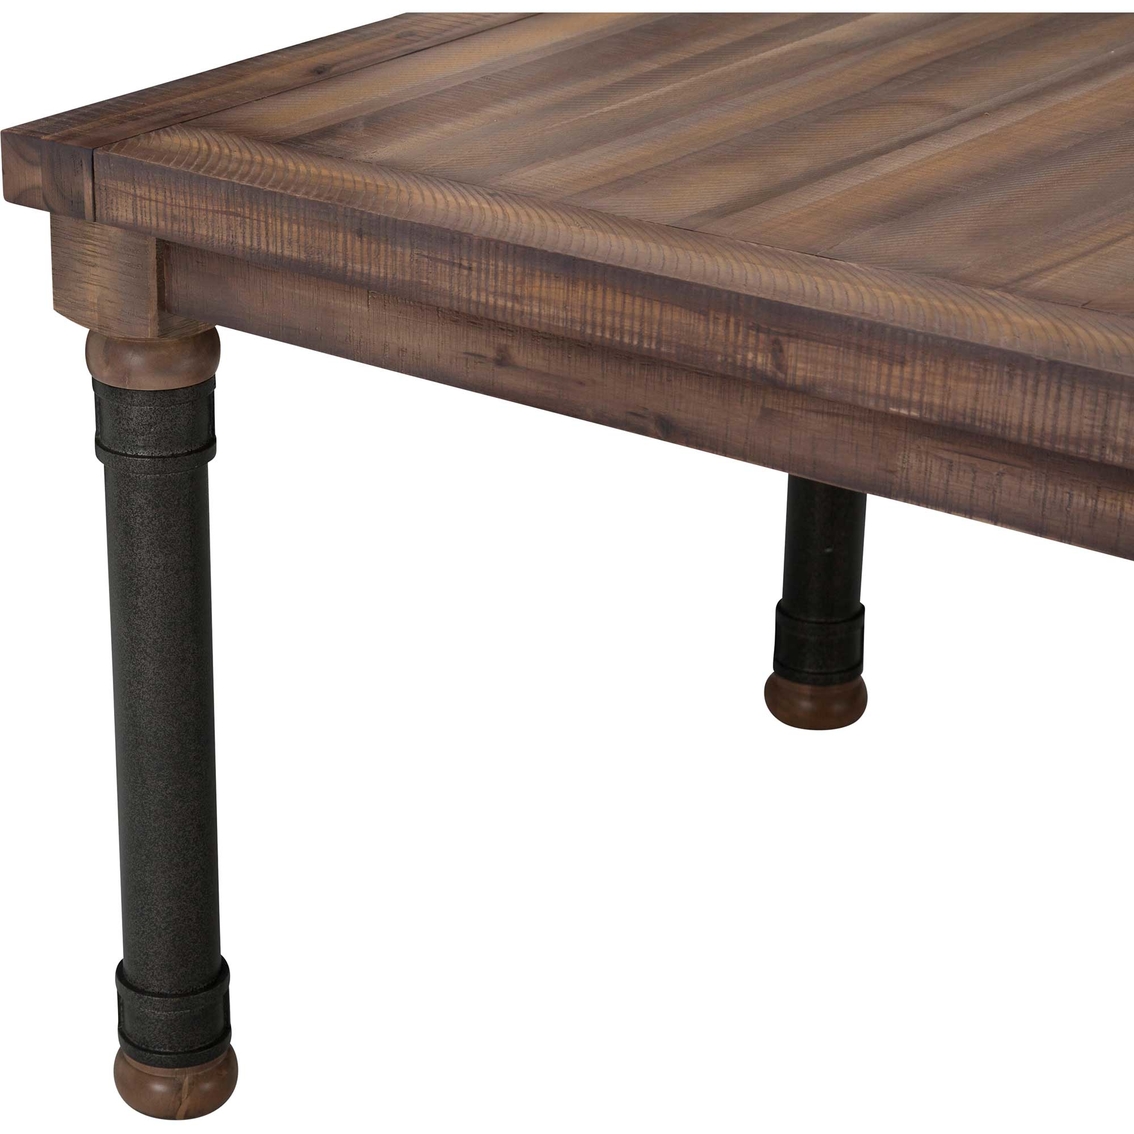 Kathy Ireland Home Crossings Rectangular Dining Table - Image 6 of 8